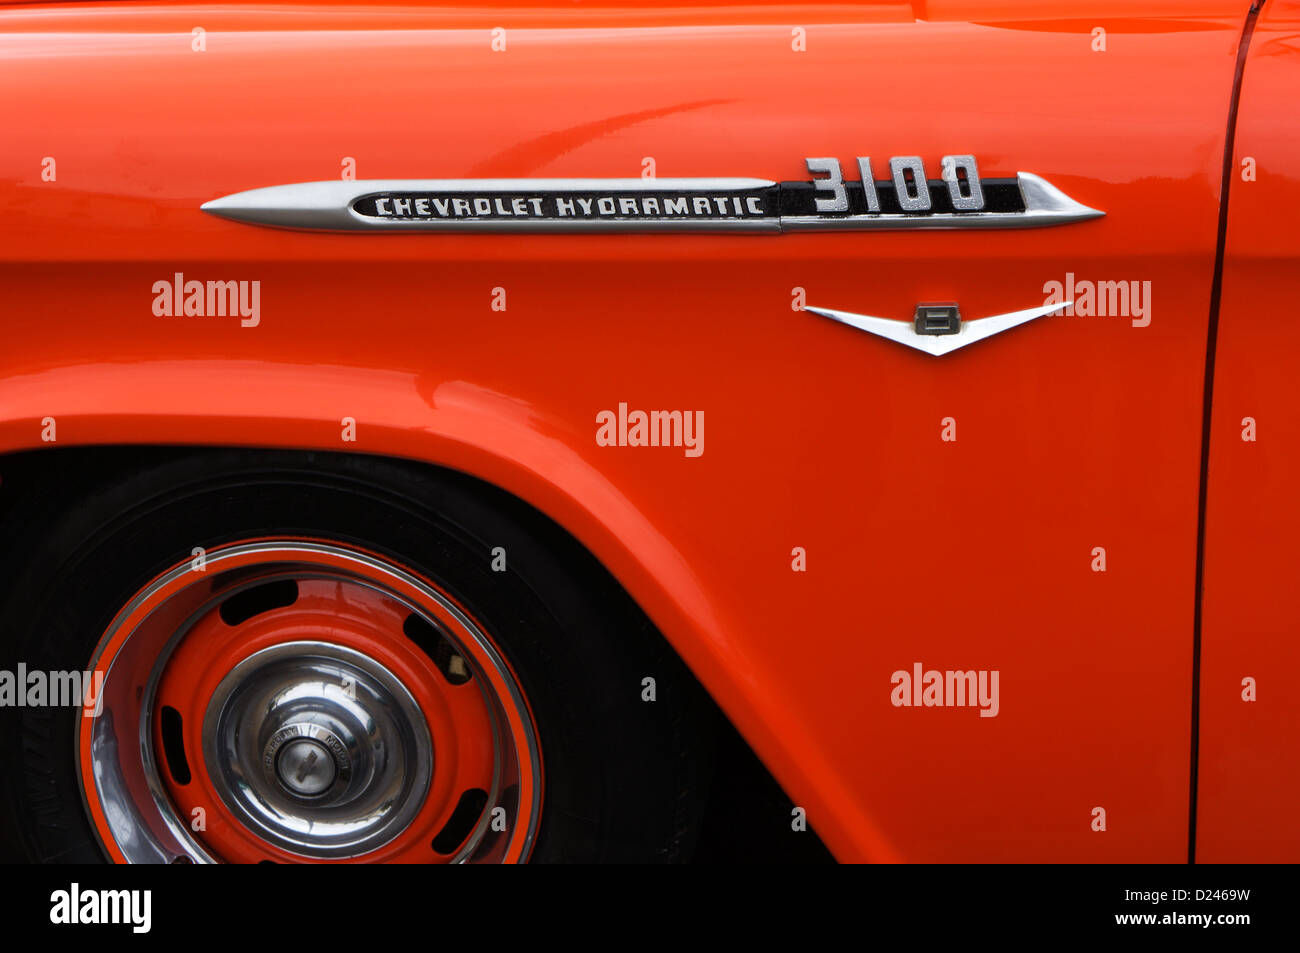 Name badge on the side of a customised Chevrolet Hydramatic 3100 pickup truck. Stock Photo